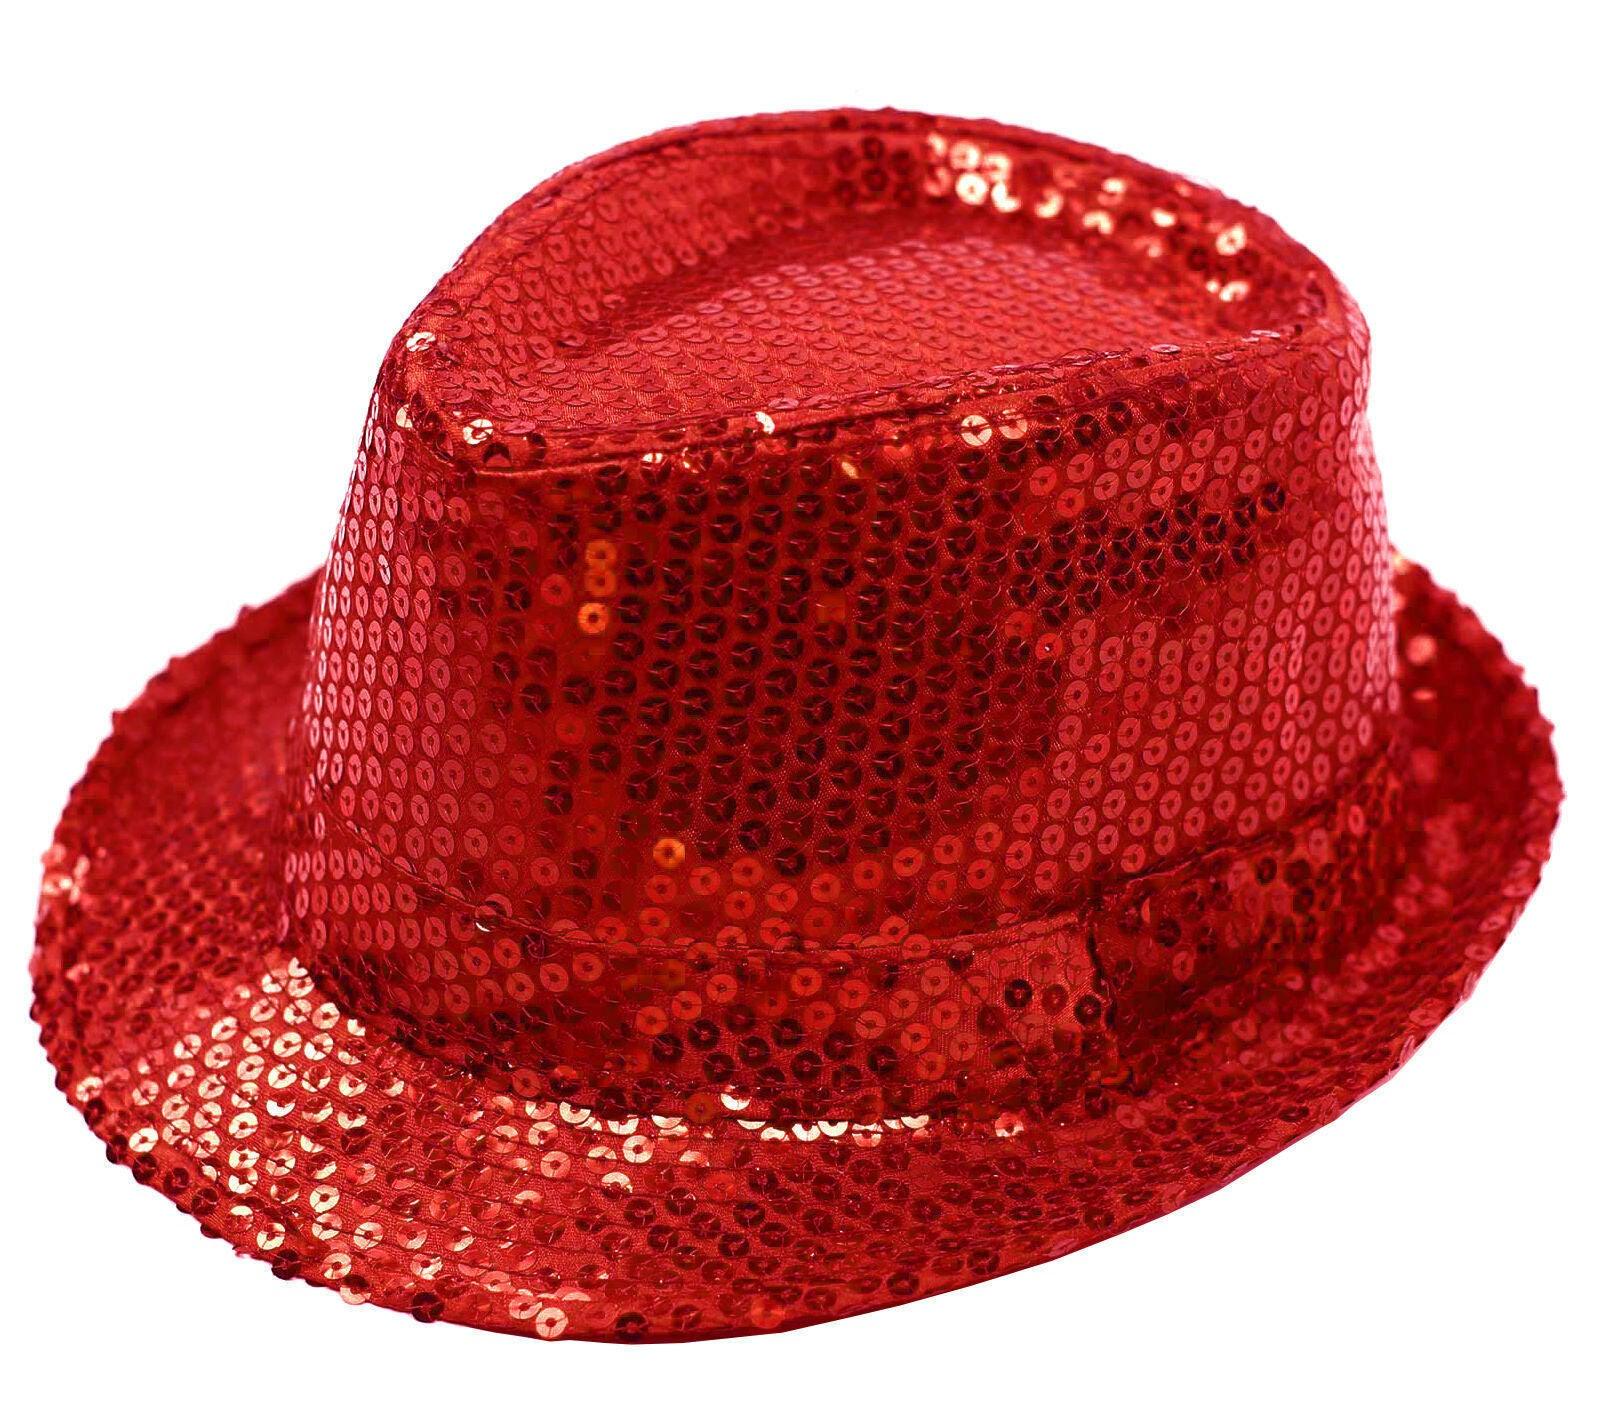 Sparkling Red Sequin Hat Braces Dicky Dickie Bow Tie Fancy Party Accessory Set - Labreeze